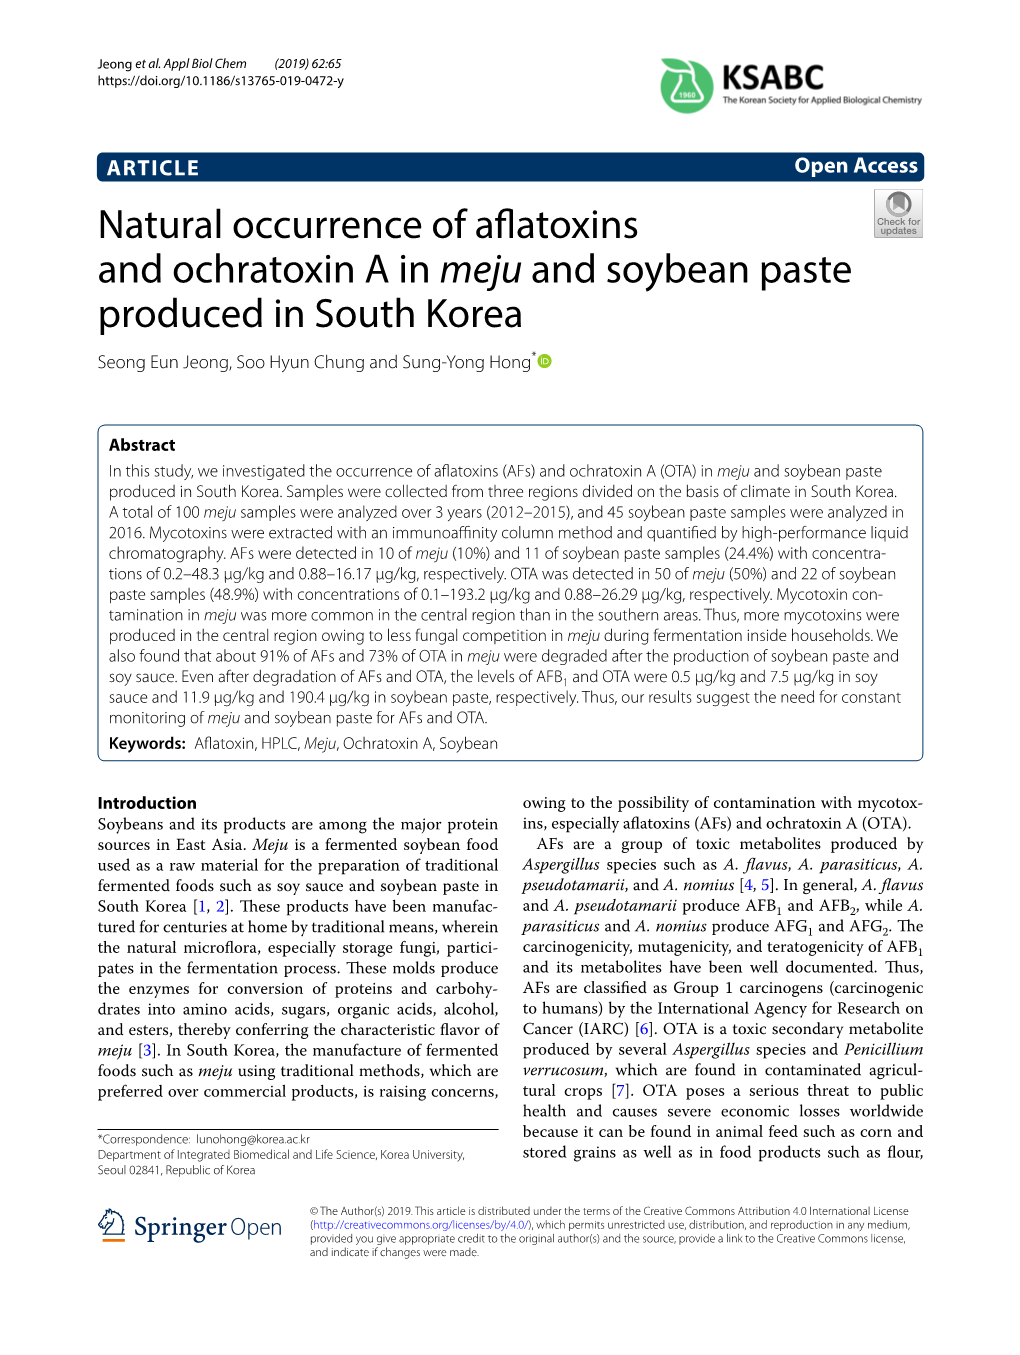 Natural Occurrence of Aflatoxins and Ochratoxin a in Meju and Soybean Paste Produced in South Korea